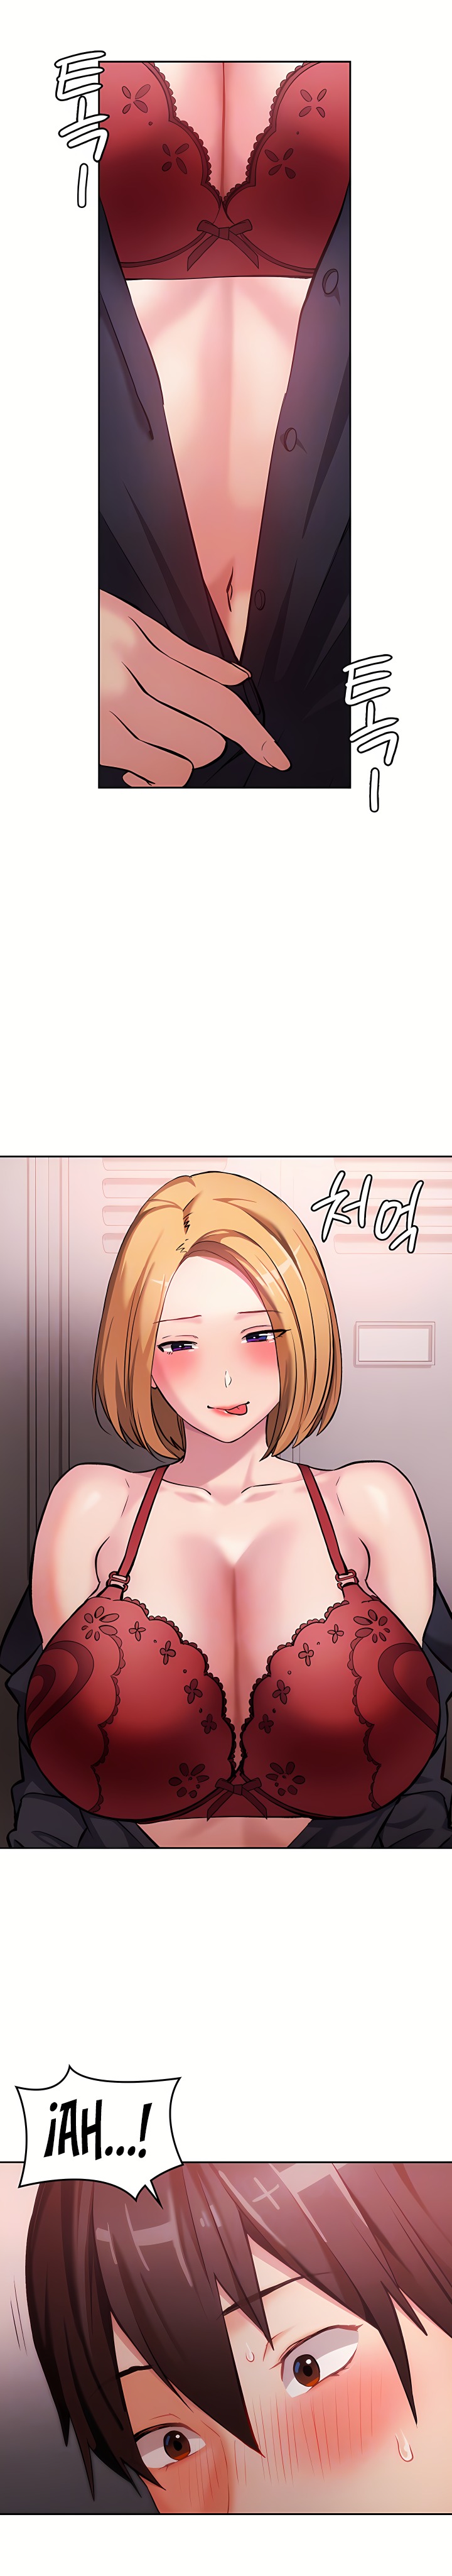 The Girl Next Door Raw - Chapter 4 Page 5